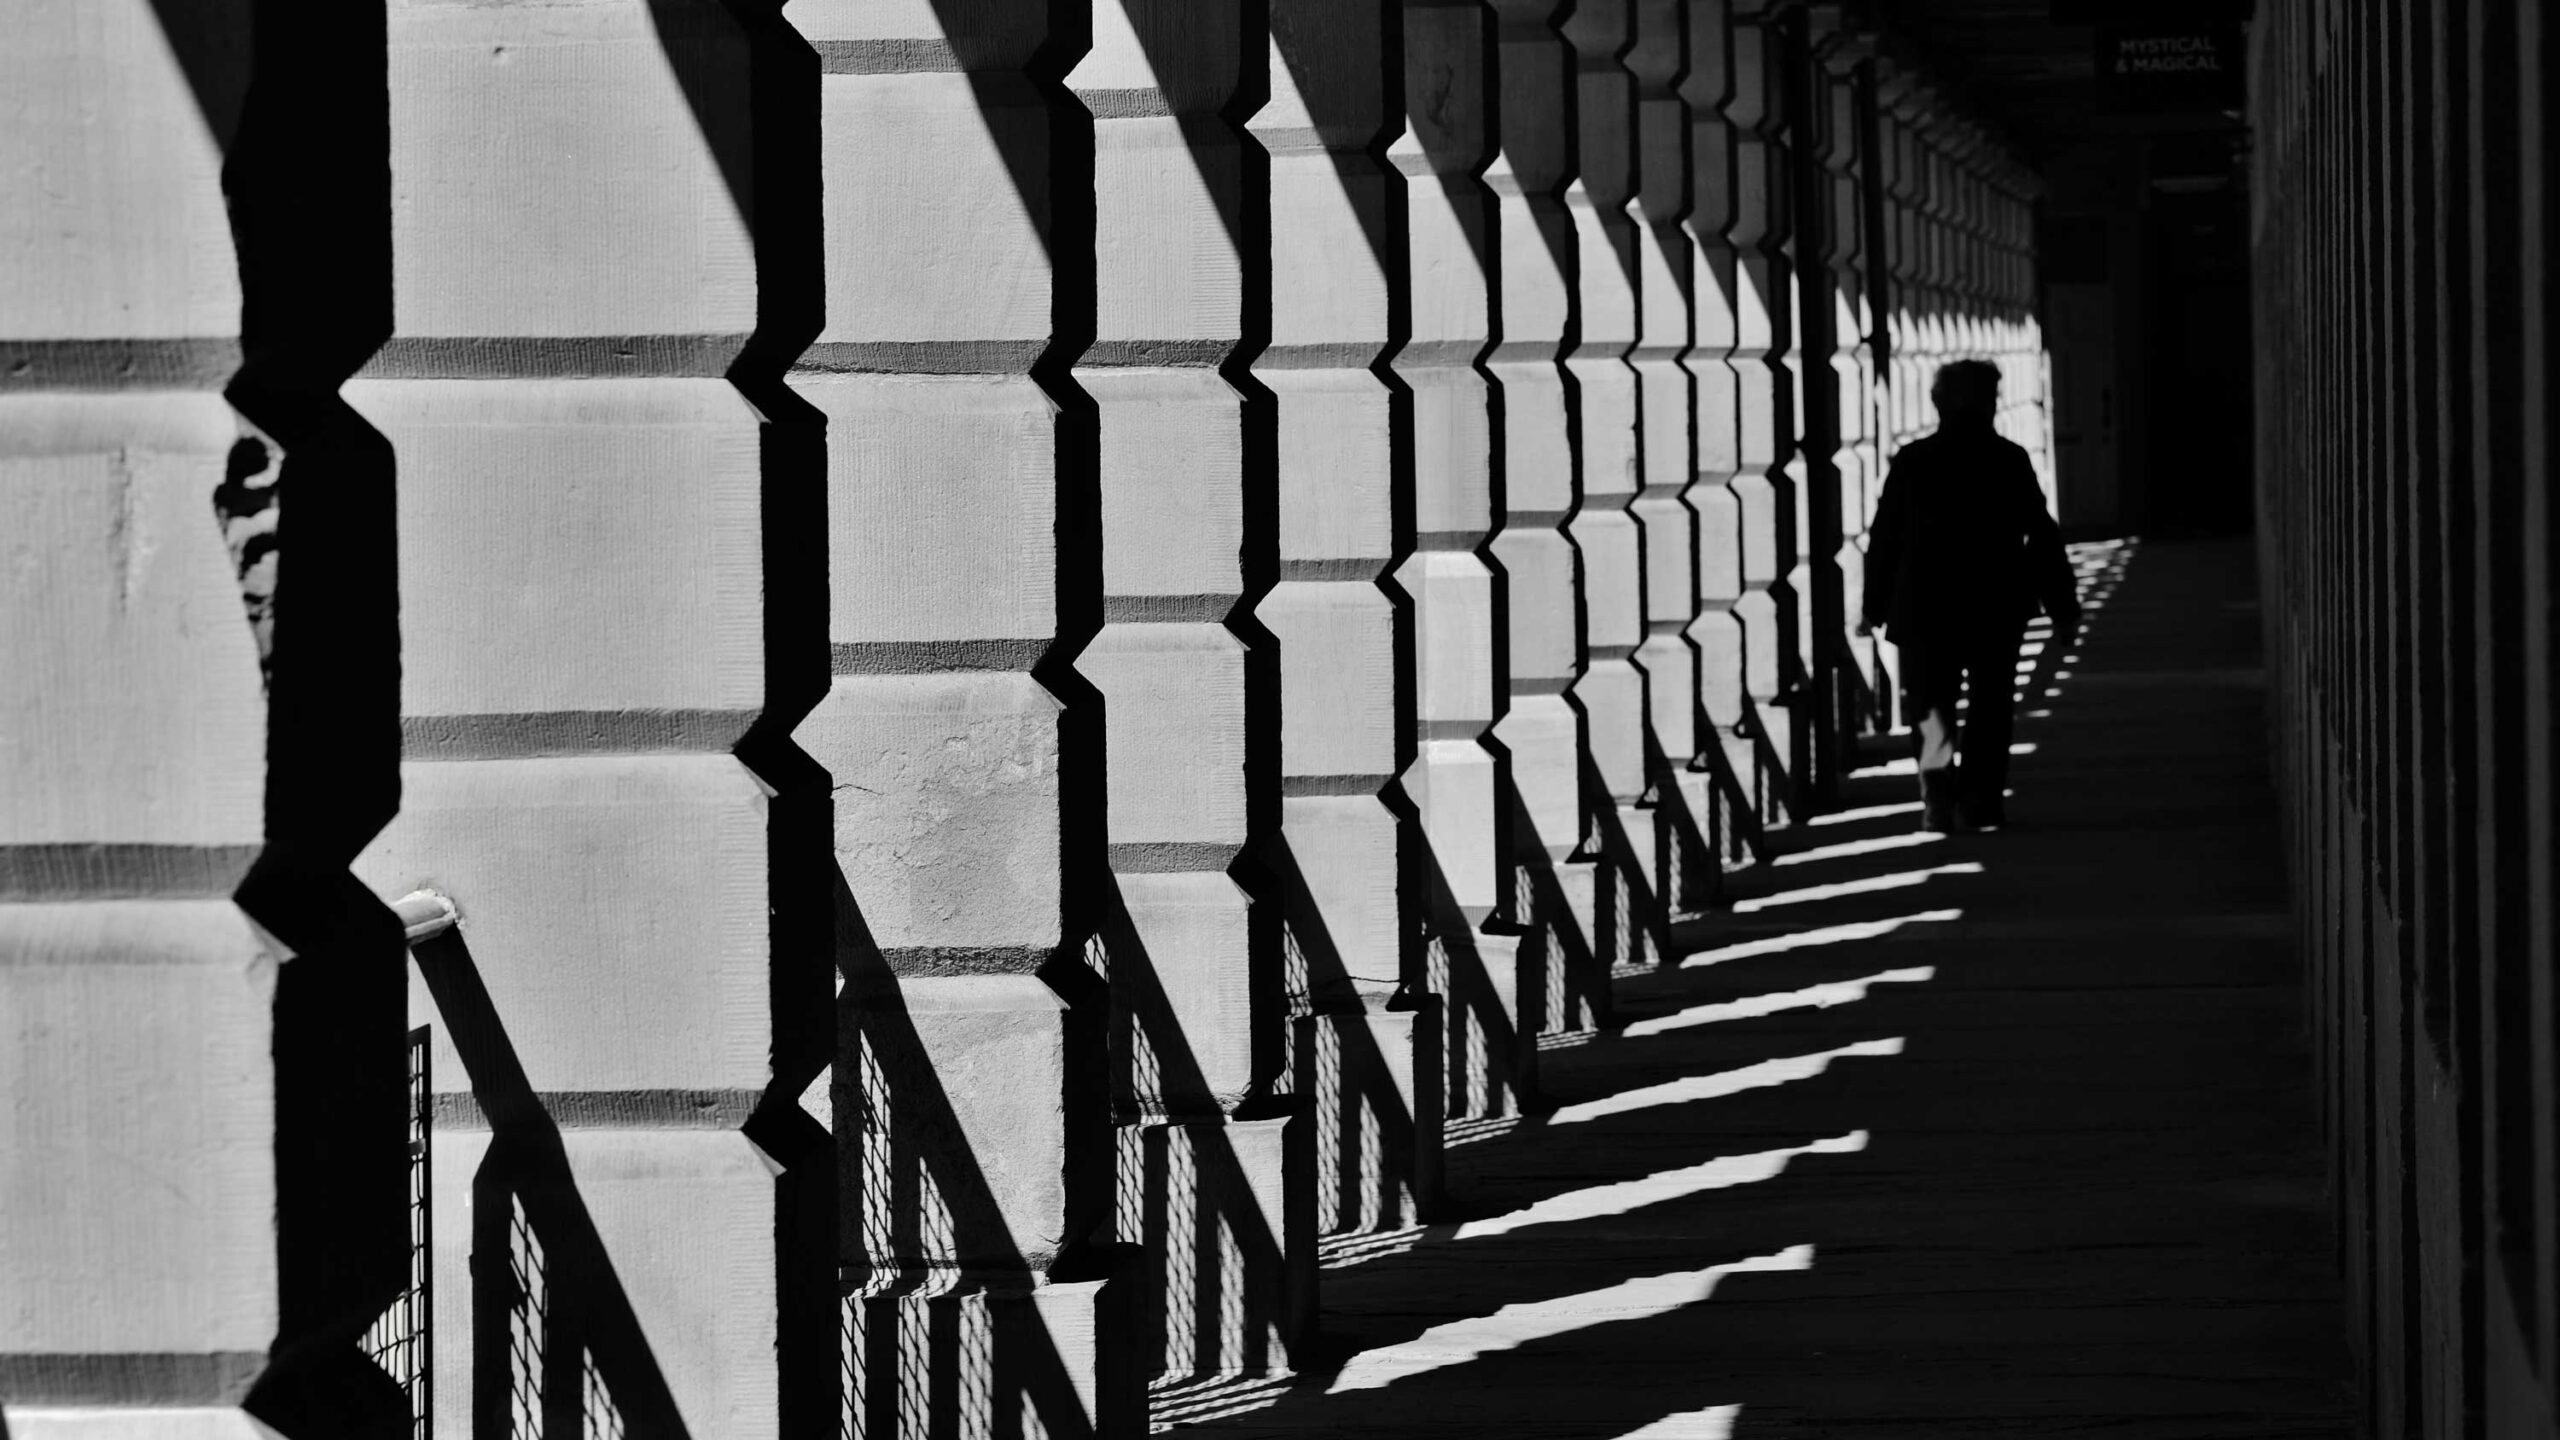 Black and white image of a person walking through a corridor with a patterned series of shadowed archways creating a dramatic play of light and shadow.